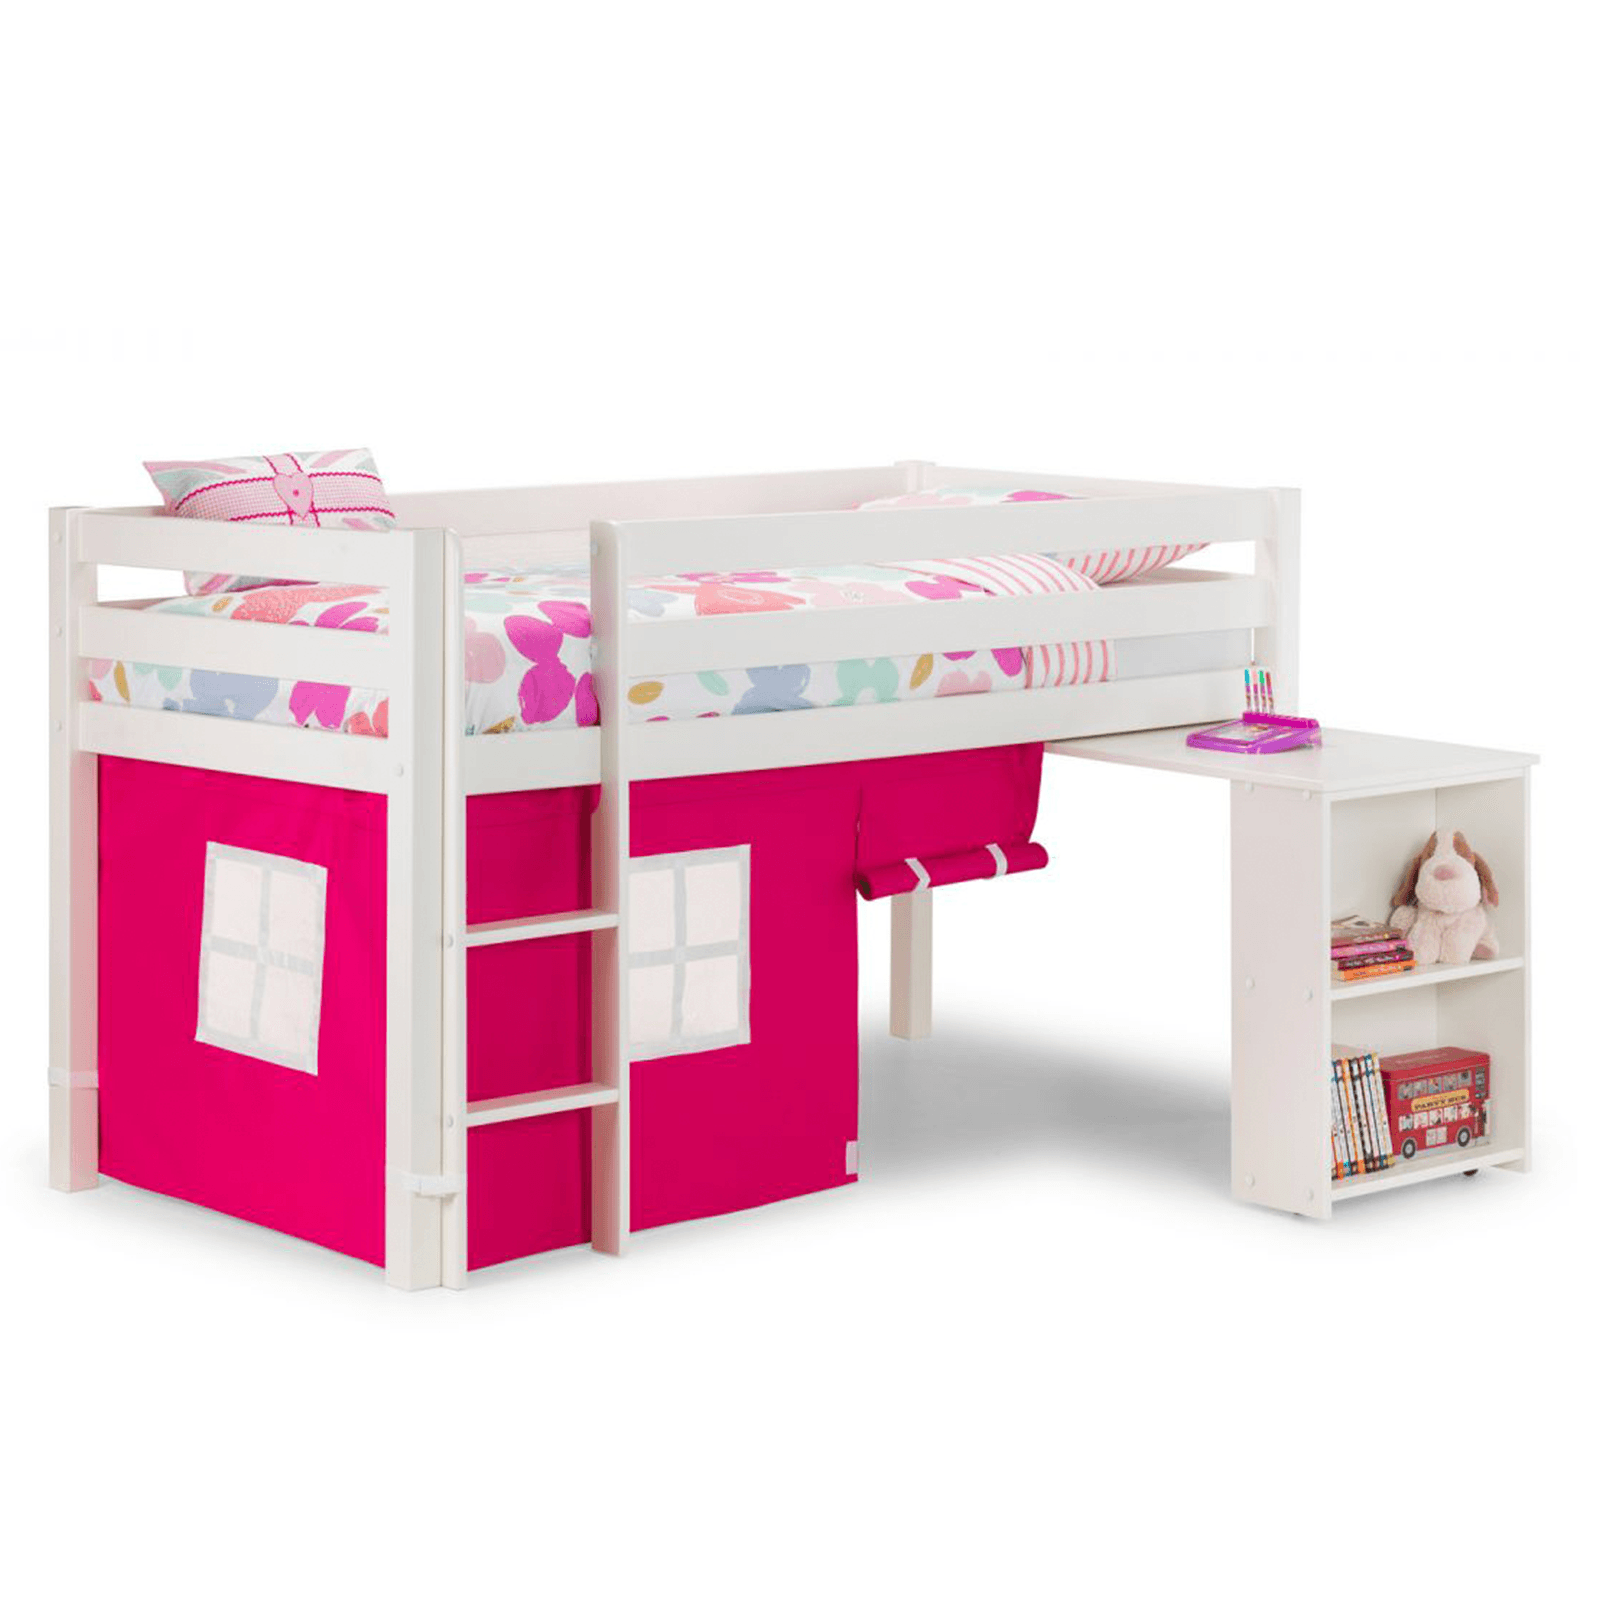 Wendy Tents Bunk Bed Pink